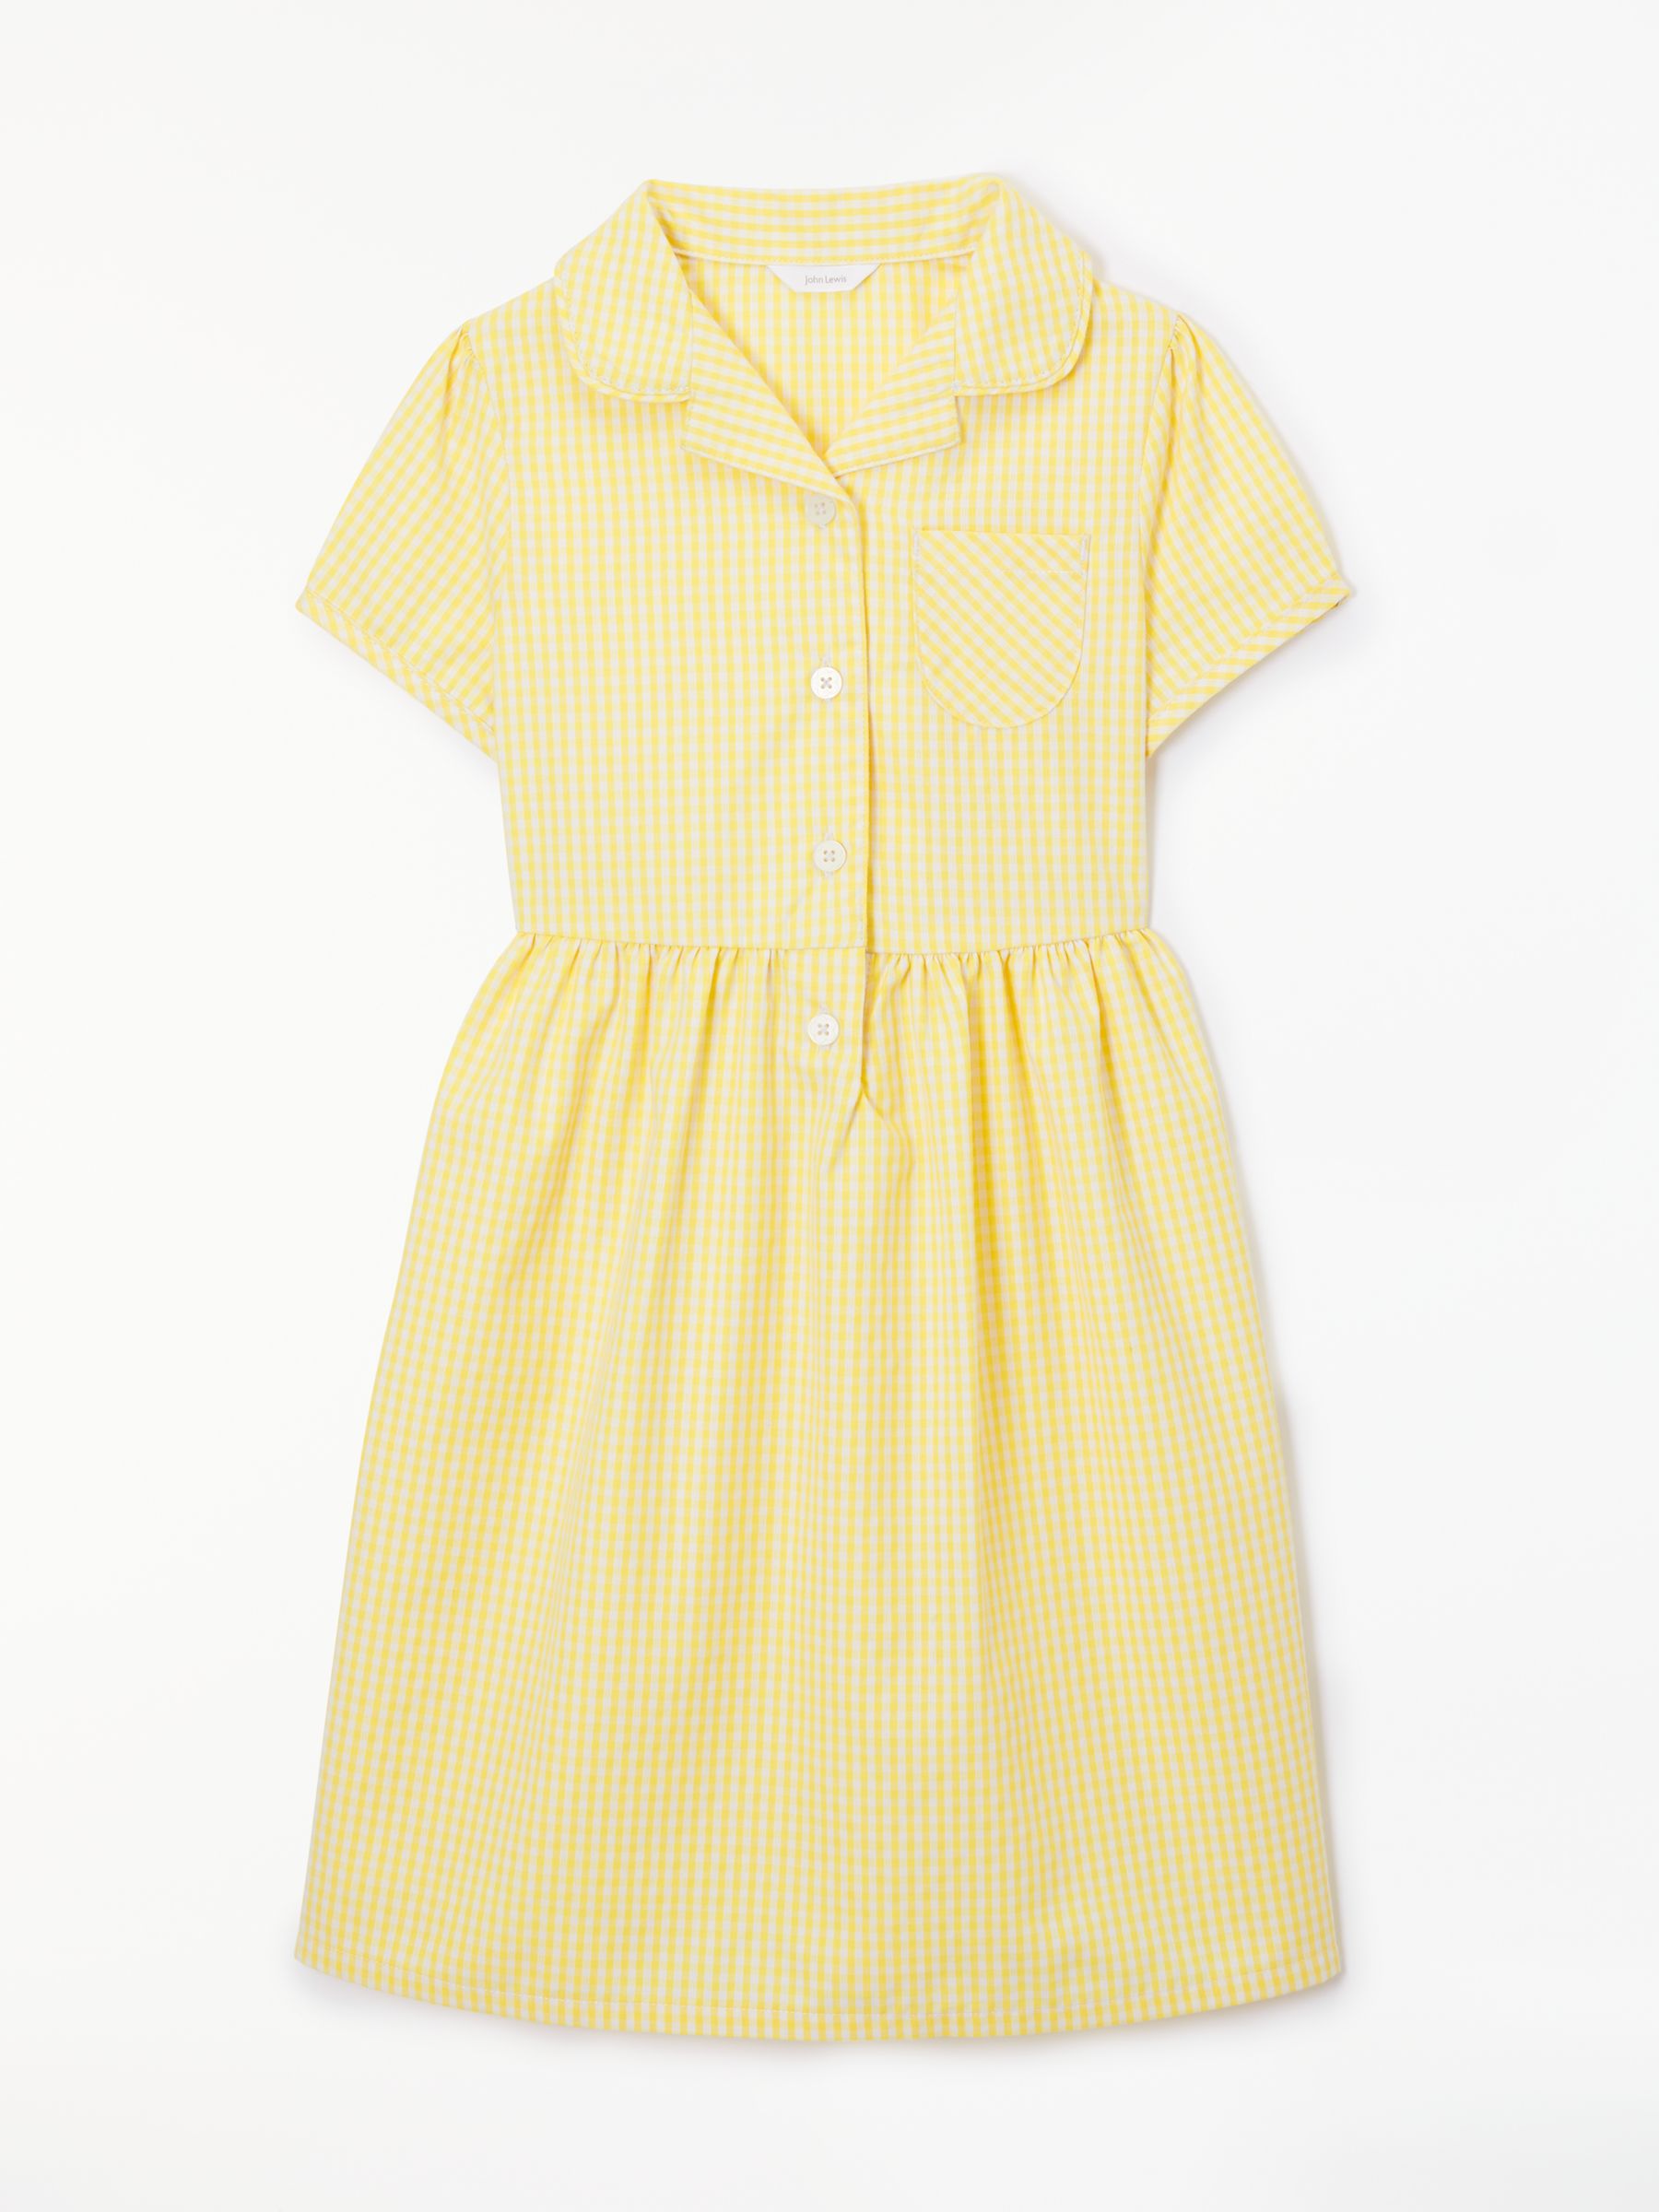 John Lewis & Partners School Belted Gingham Checked Summer Dress at ...